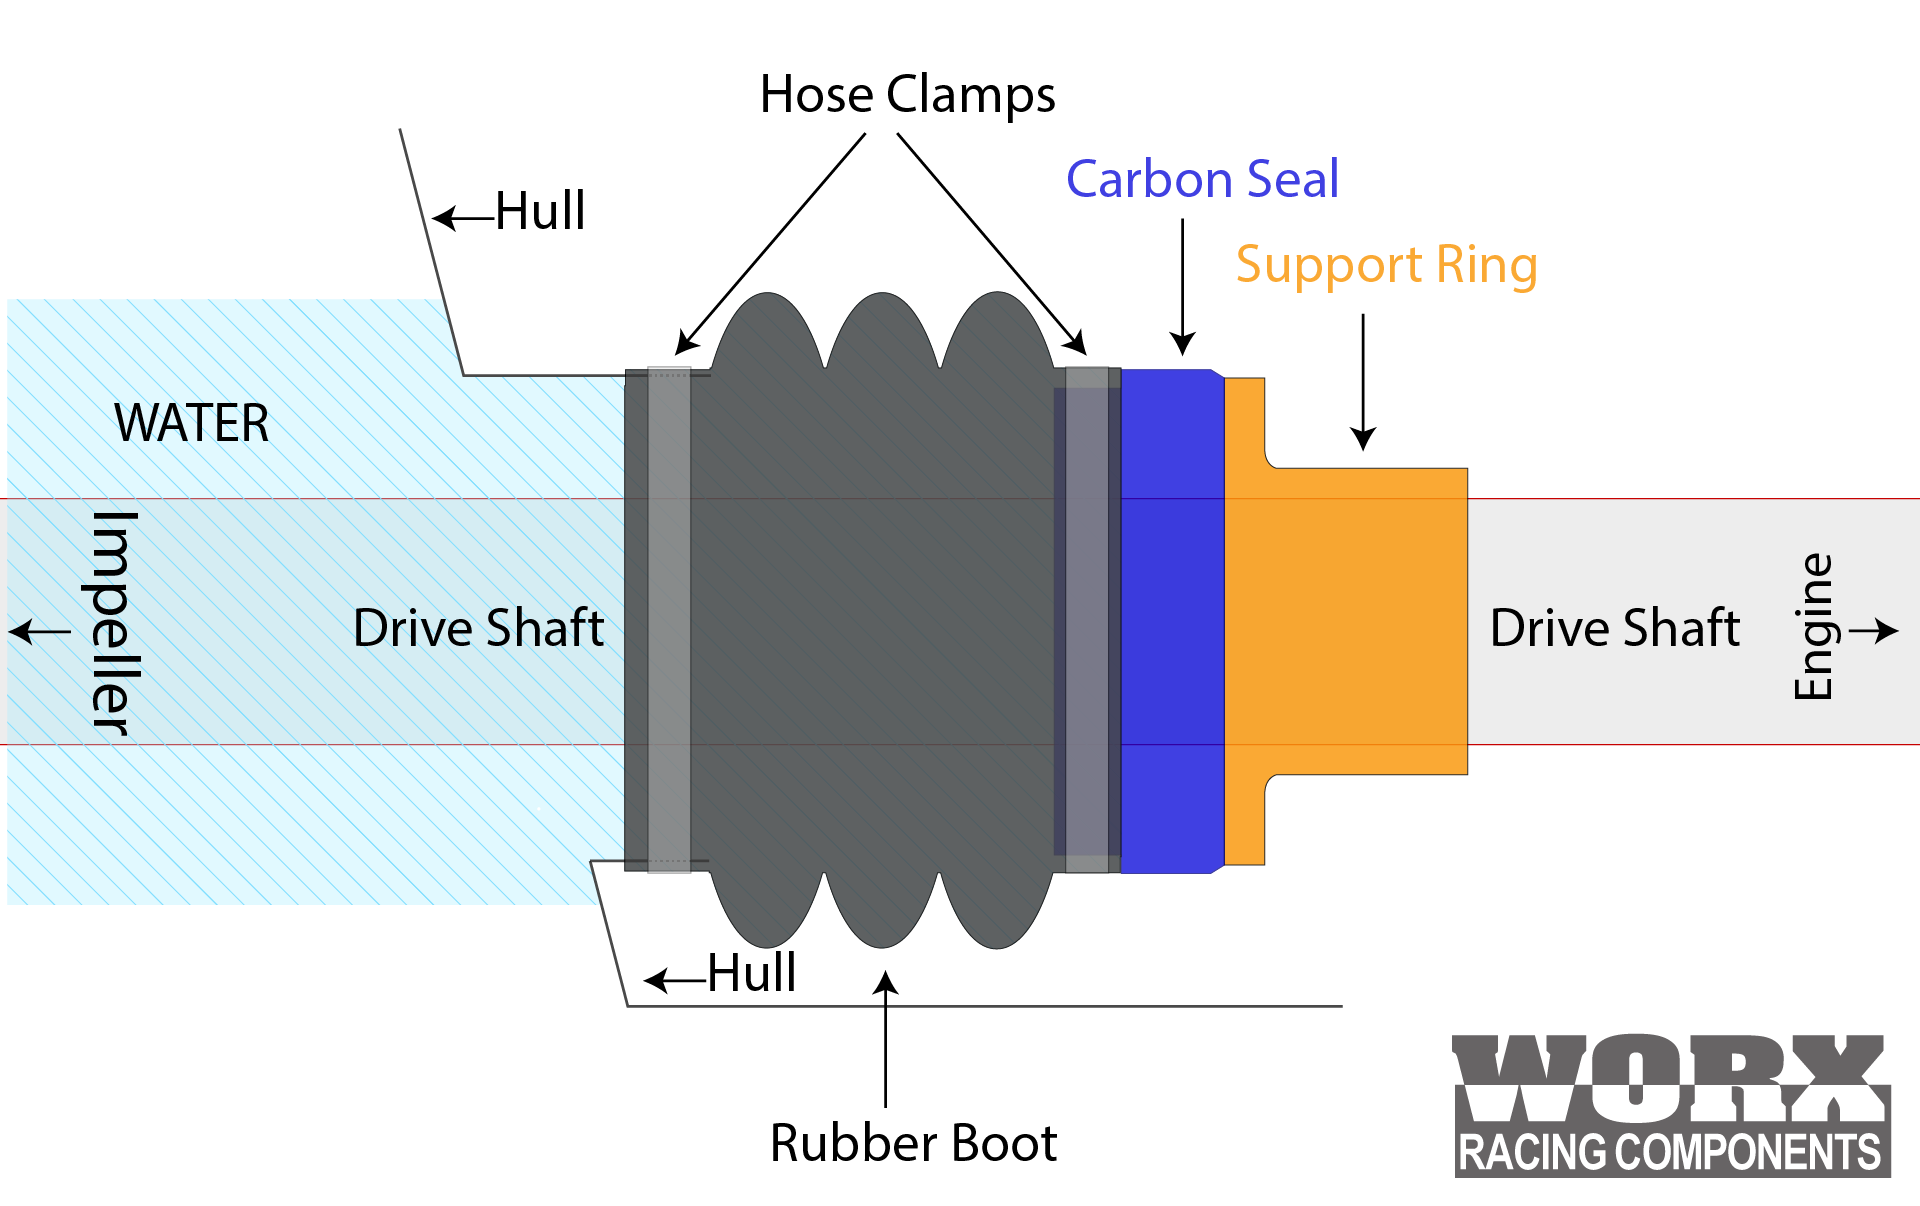 What is a Carbon seal?